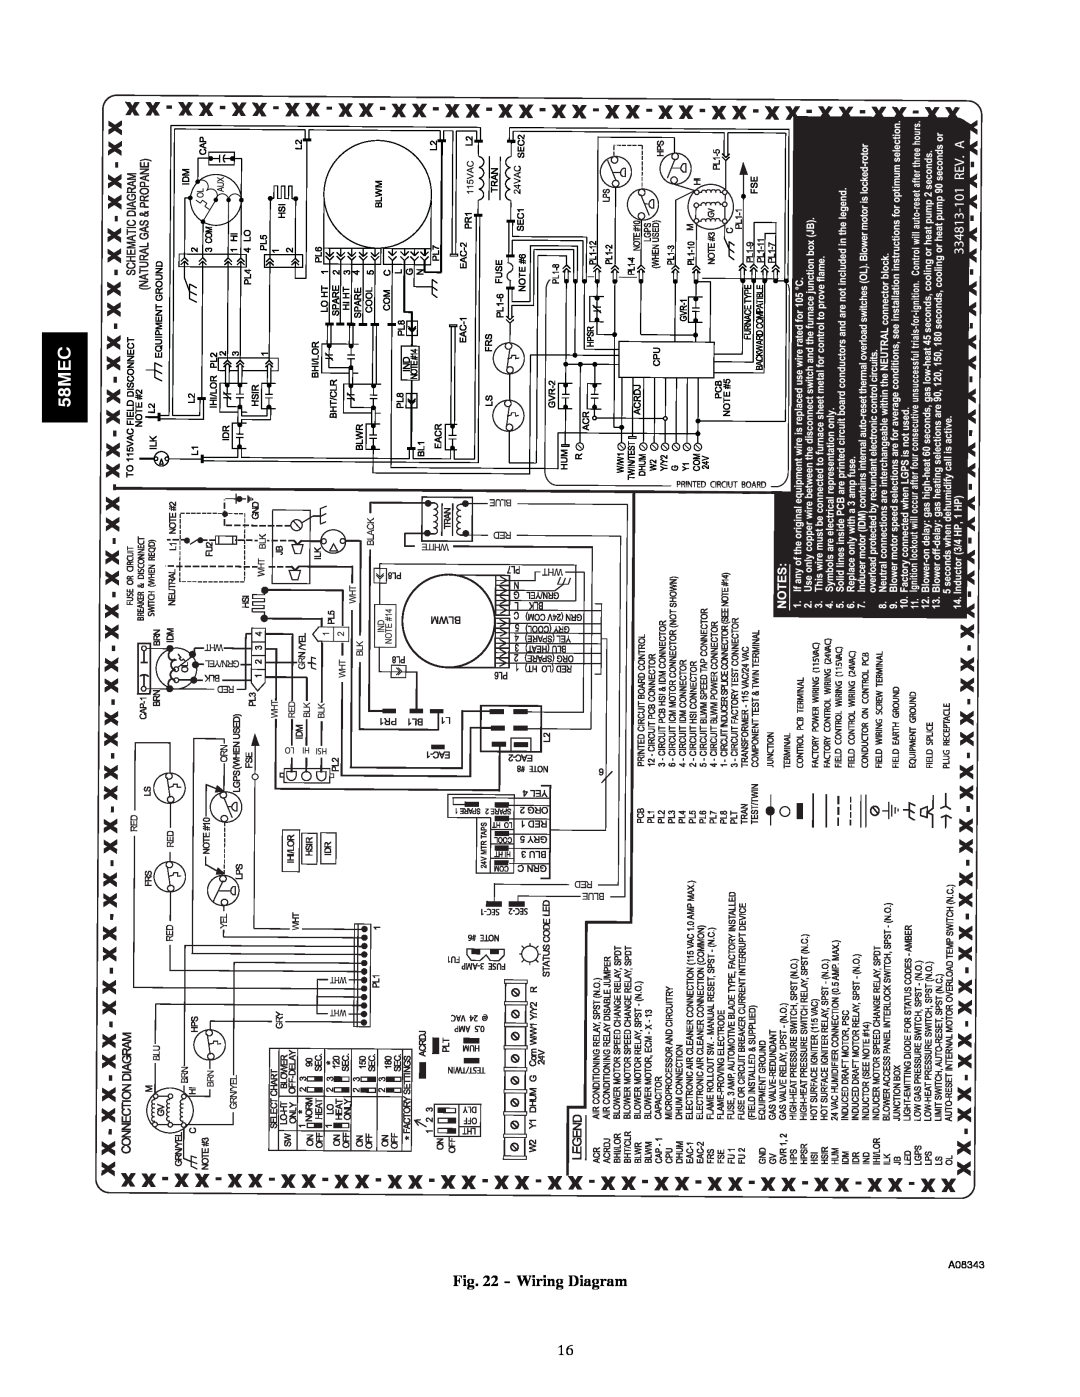 Carrier 58MEC instruction manual Wiring Diagram, A08343 